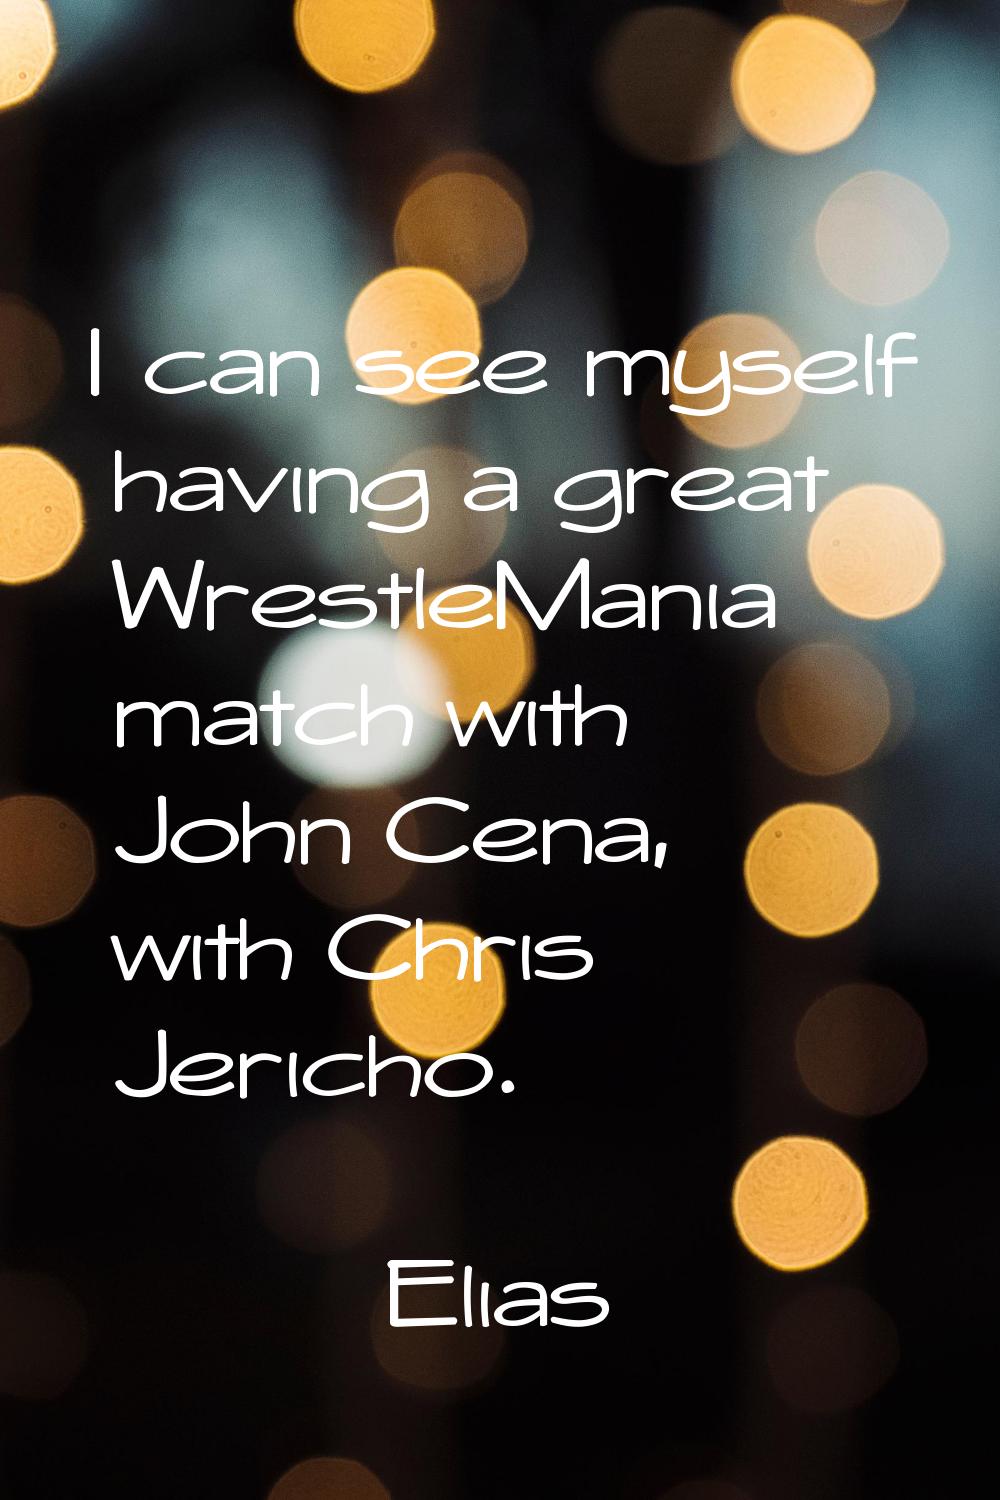 I can see myself having a great WrestleMania match with John Cena, with Chris Jericho.